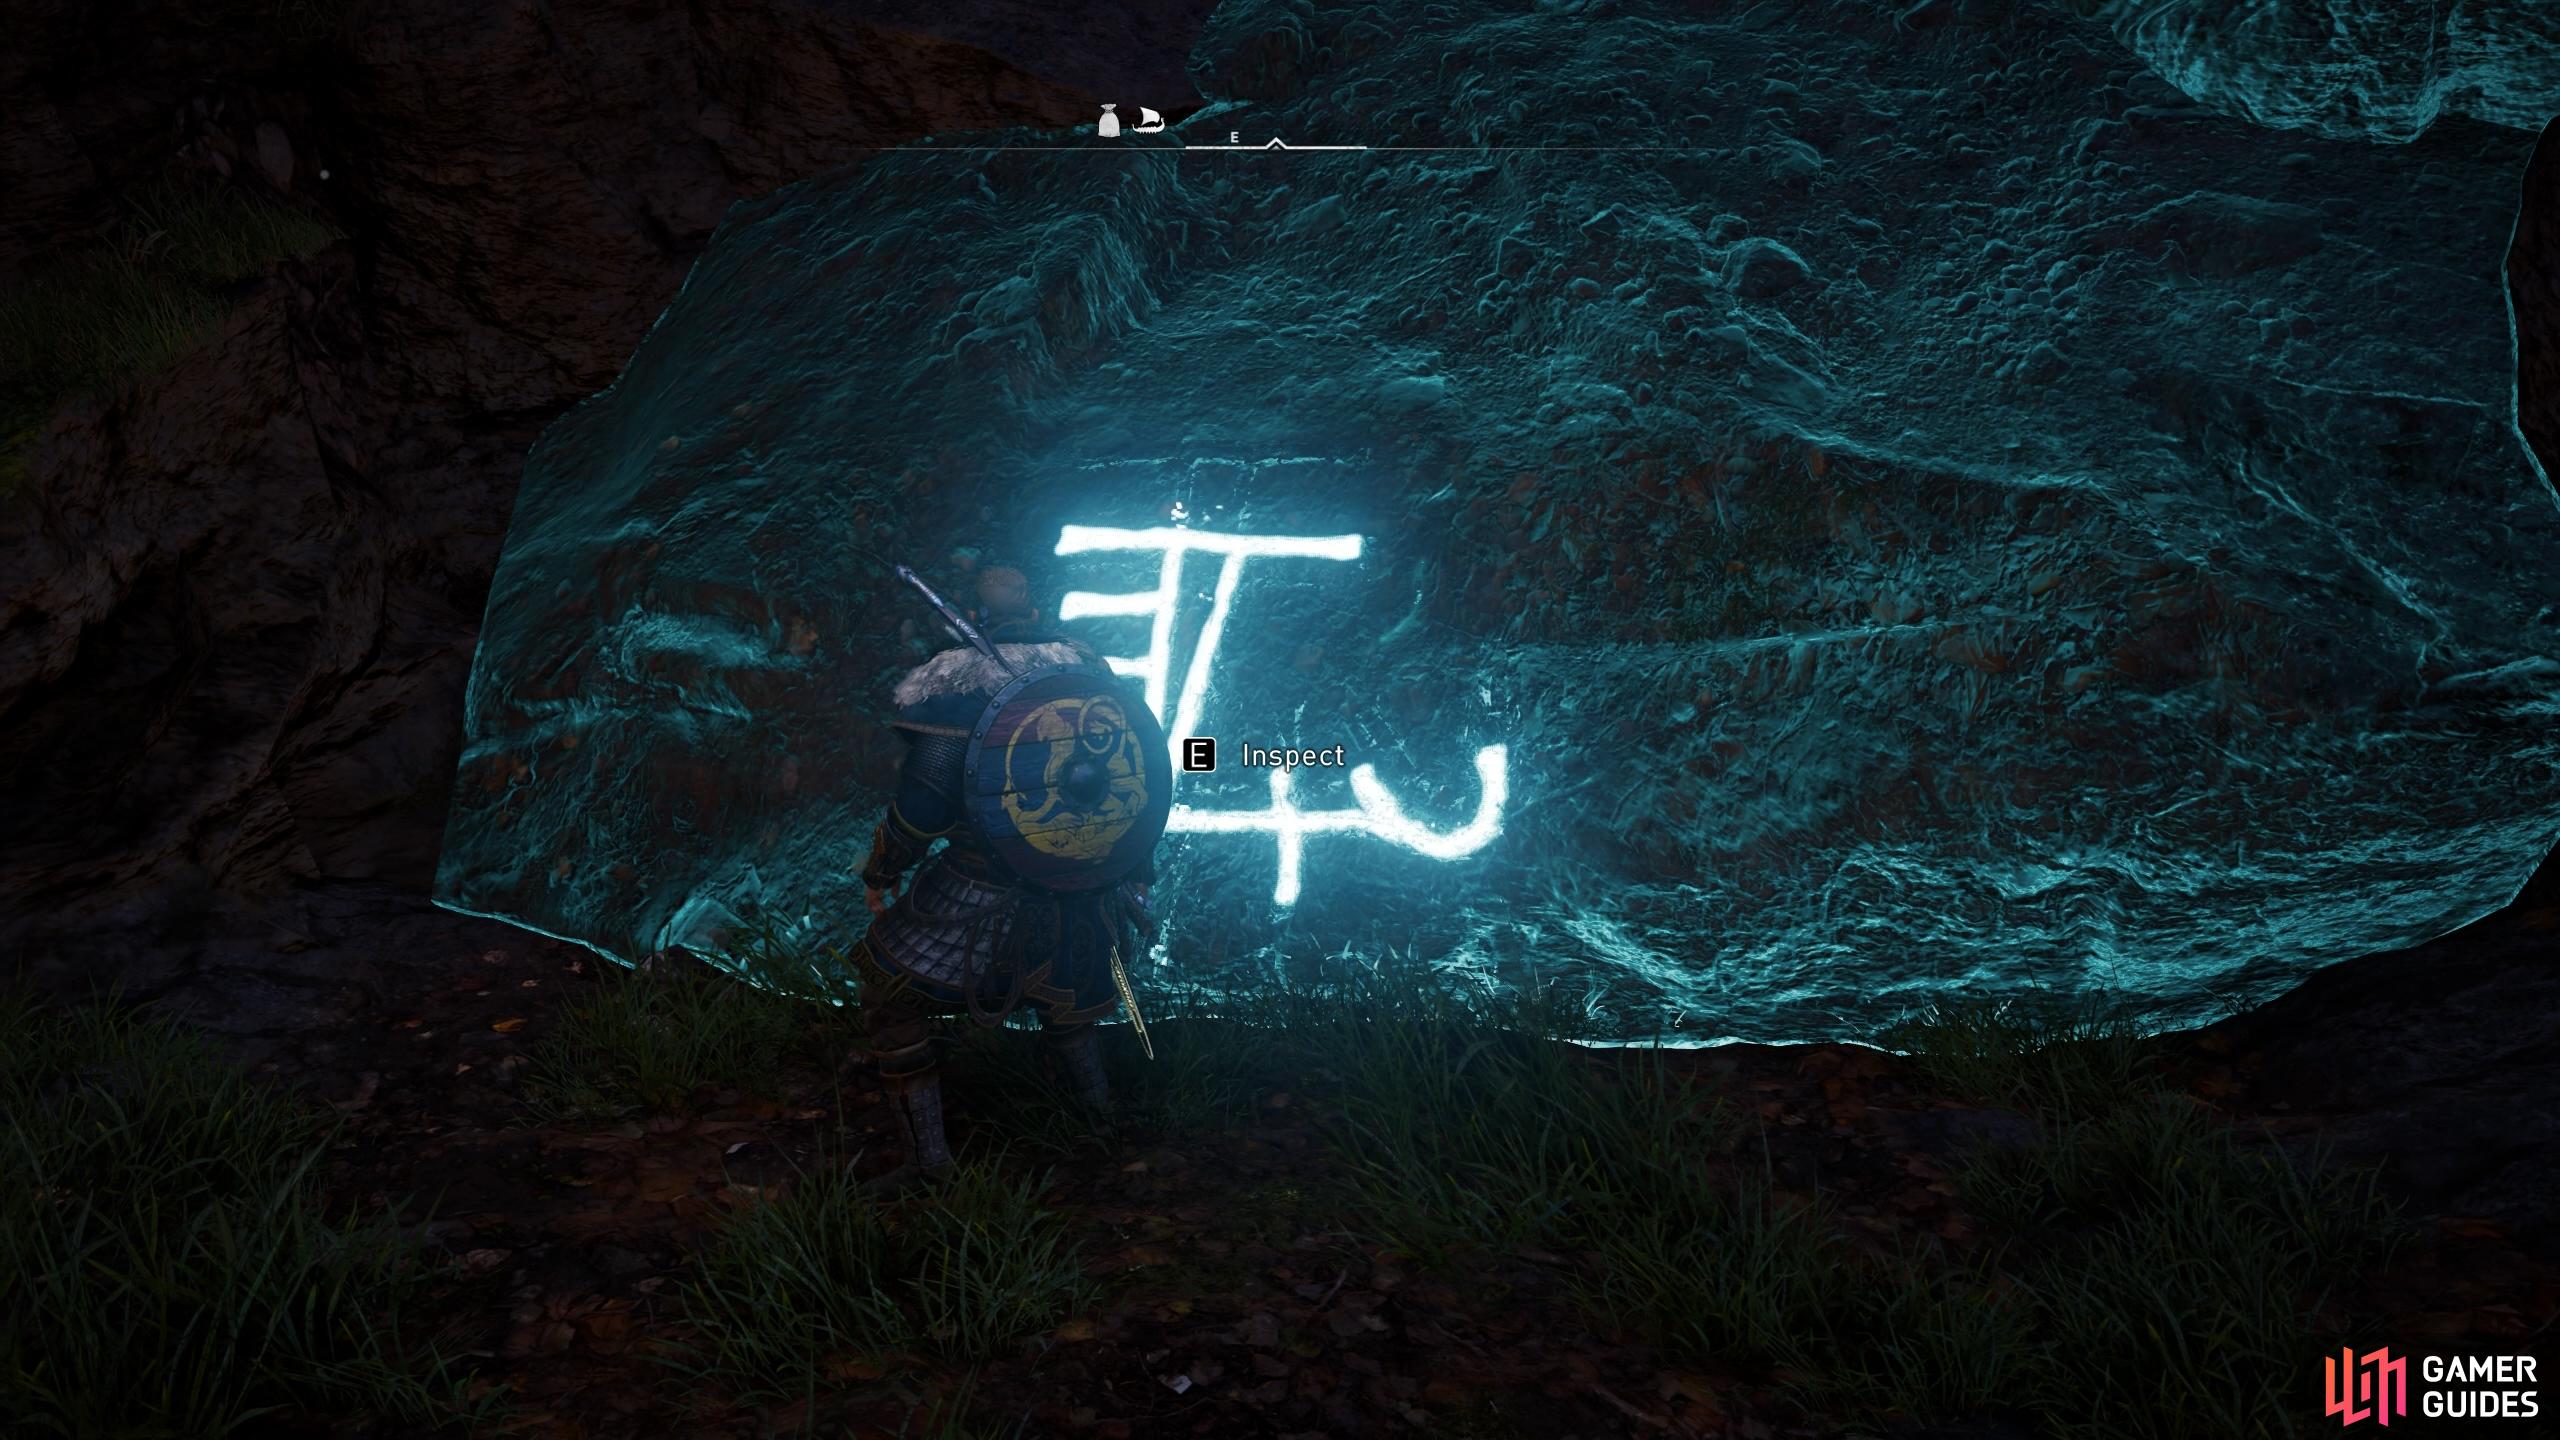 Youll need to use Odins Sight to highlight the runic inscription, then interact with it to reveal the entrance.